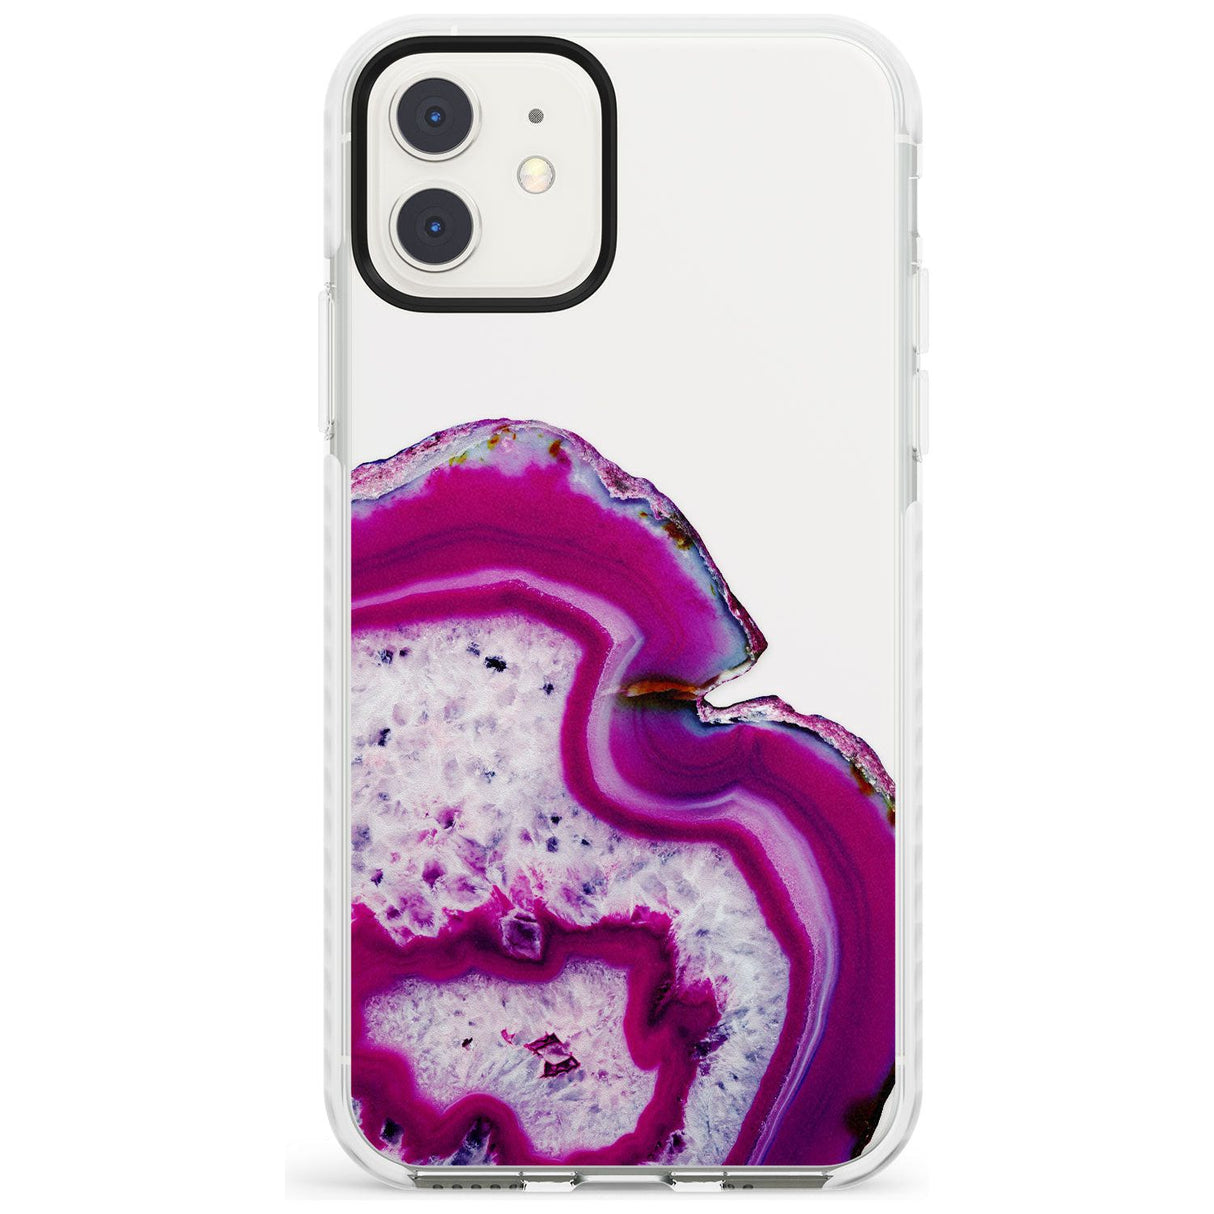 Violet & White Swirl Agate Crystal Clear Design Impact Phone Case for iPhone 11